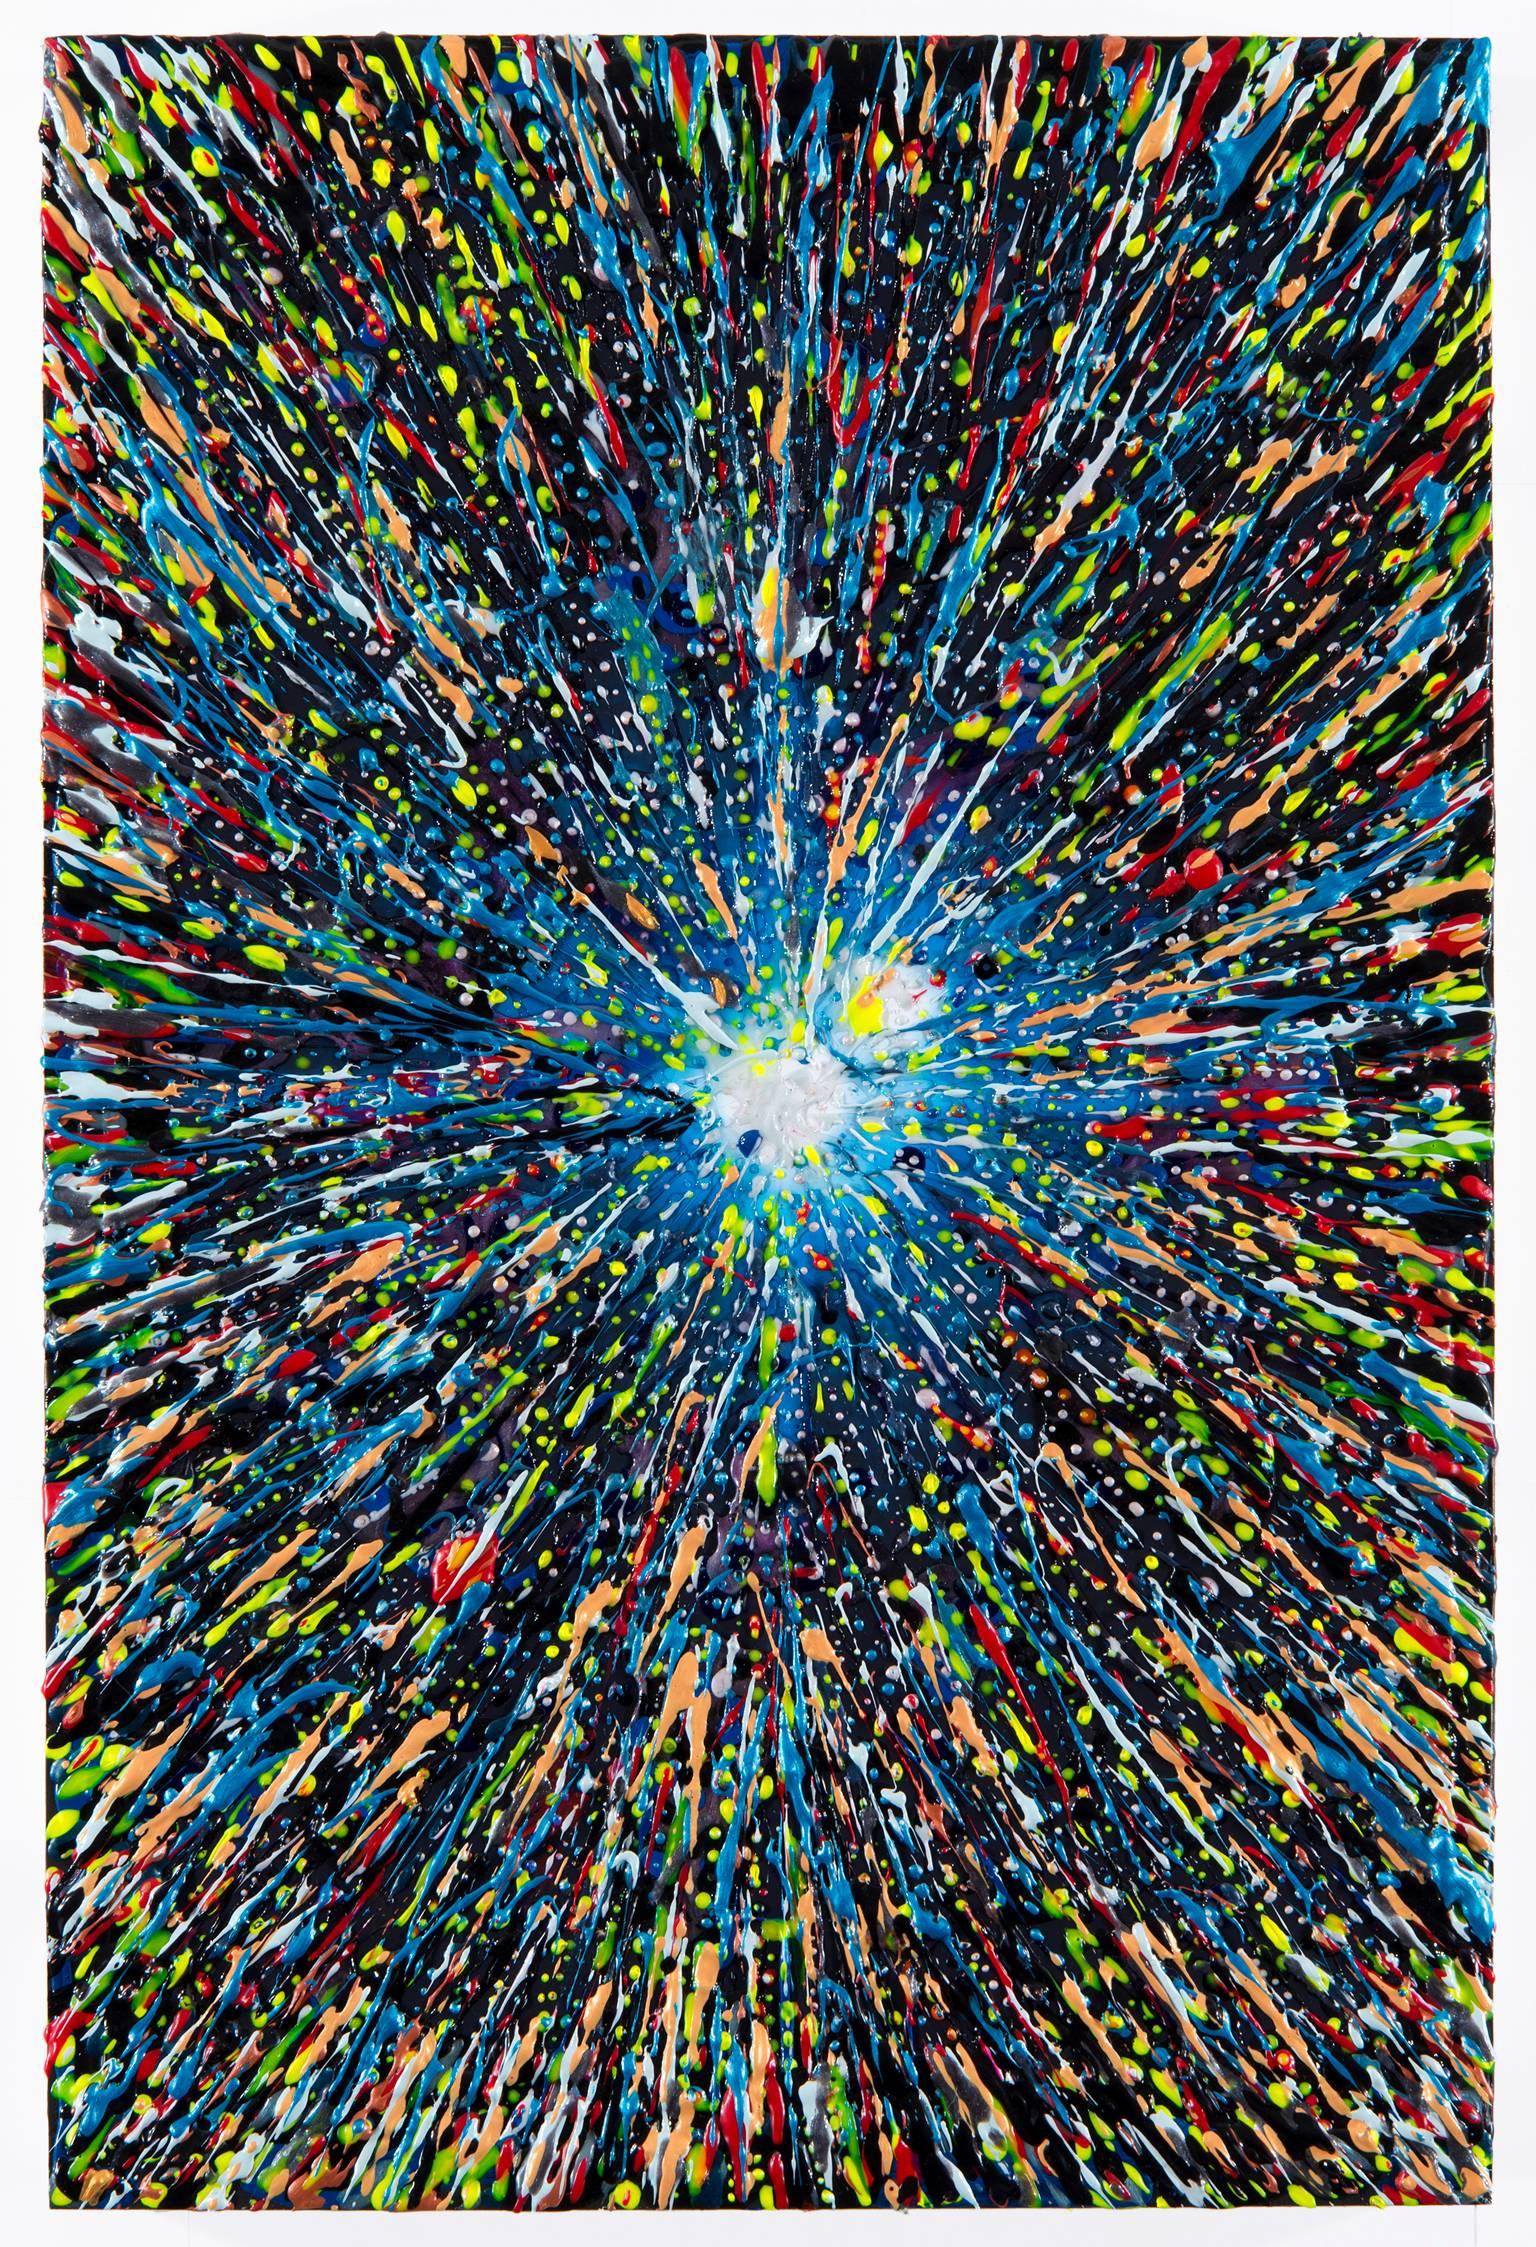 “Bang” blues, reds and greens a cosmic explosion, inspired by Hubble telescope - Painting by Elizabeth Knowles